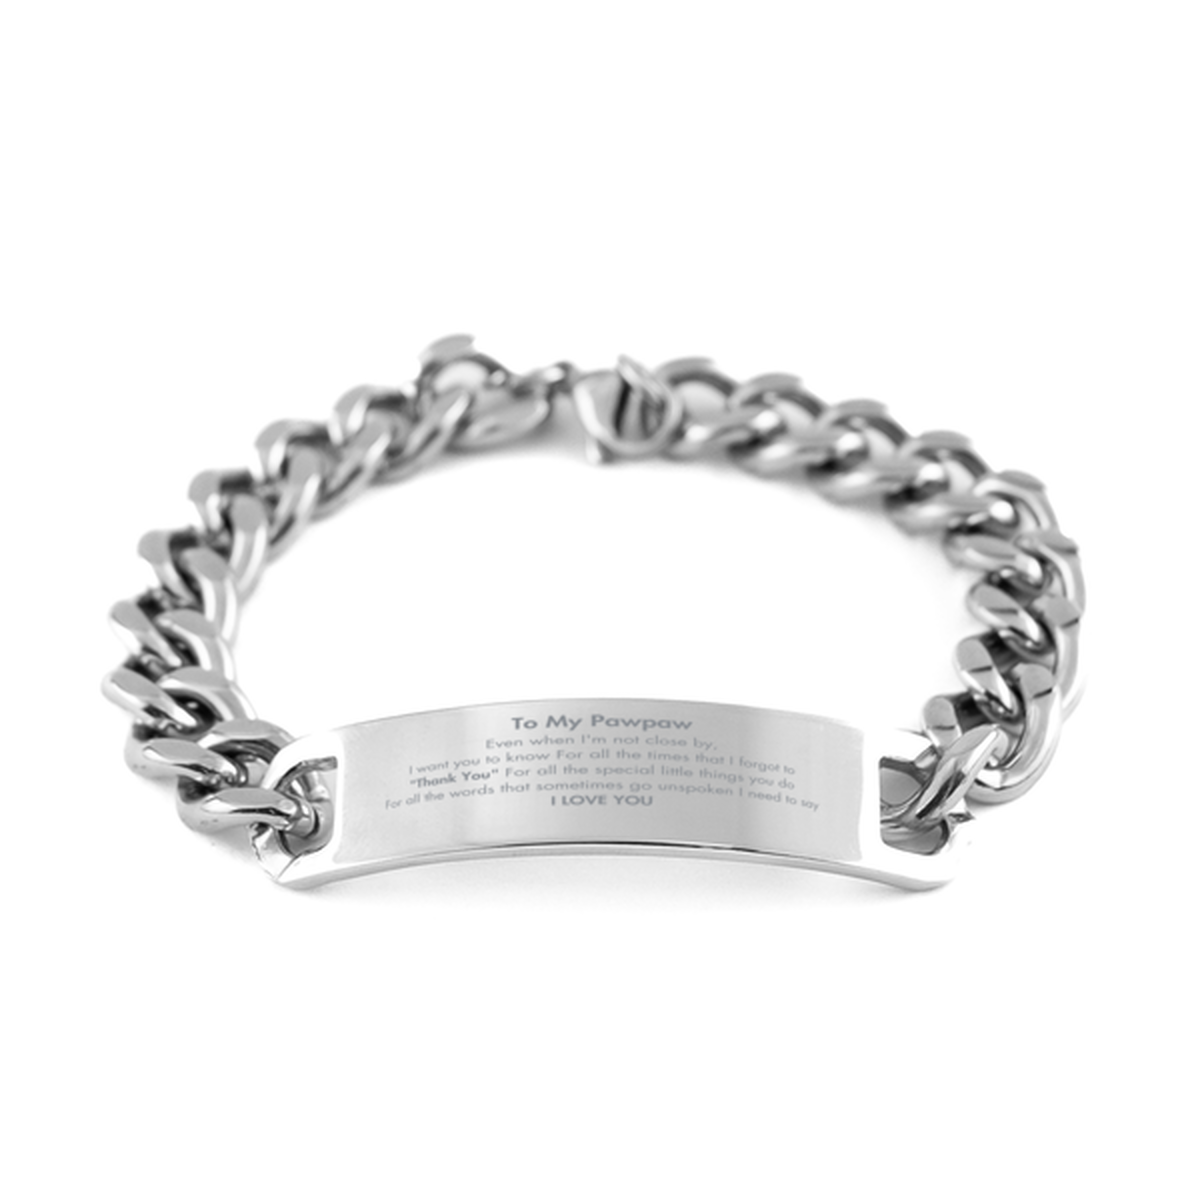 Thank You Gifts for Pawpaw, Keepsake Cuban Chain Stainless Steel Bracelet Gifts for Pawpaw Birthday Mother's day Father's Day Pawpaw For all the words That sometimes go unspoken I need to say I LOVE YOU